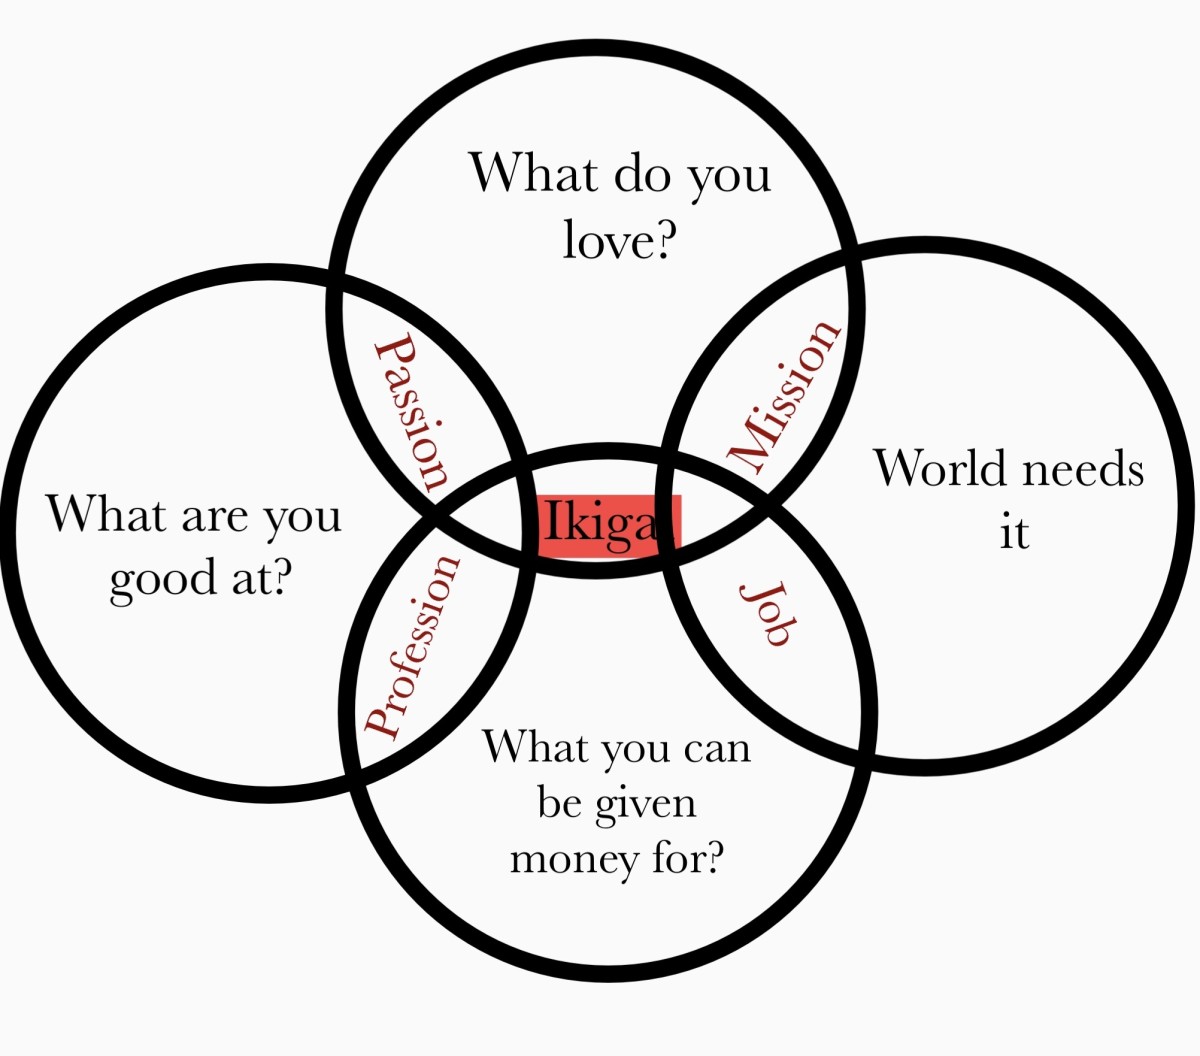 how-the-book-ikigai-is-helpful-in-shaping-our-life-purpose-and-choosing-our-careers